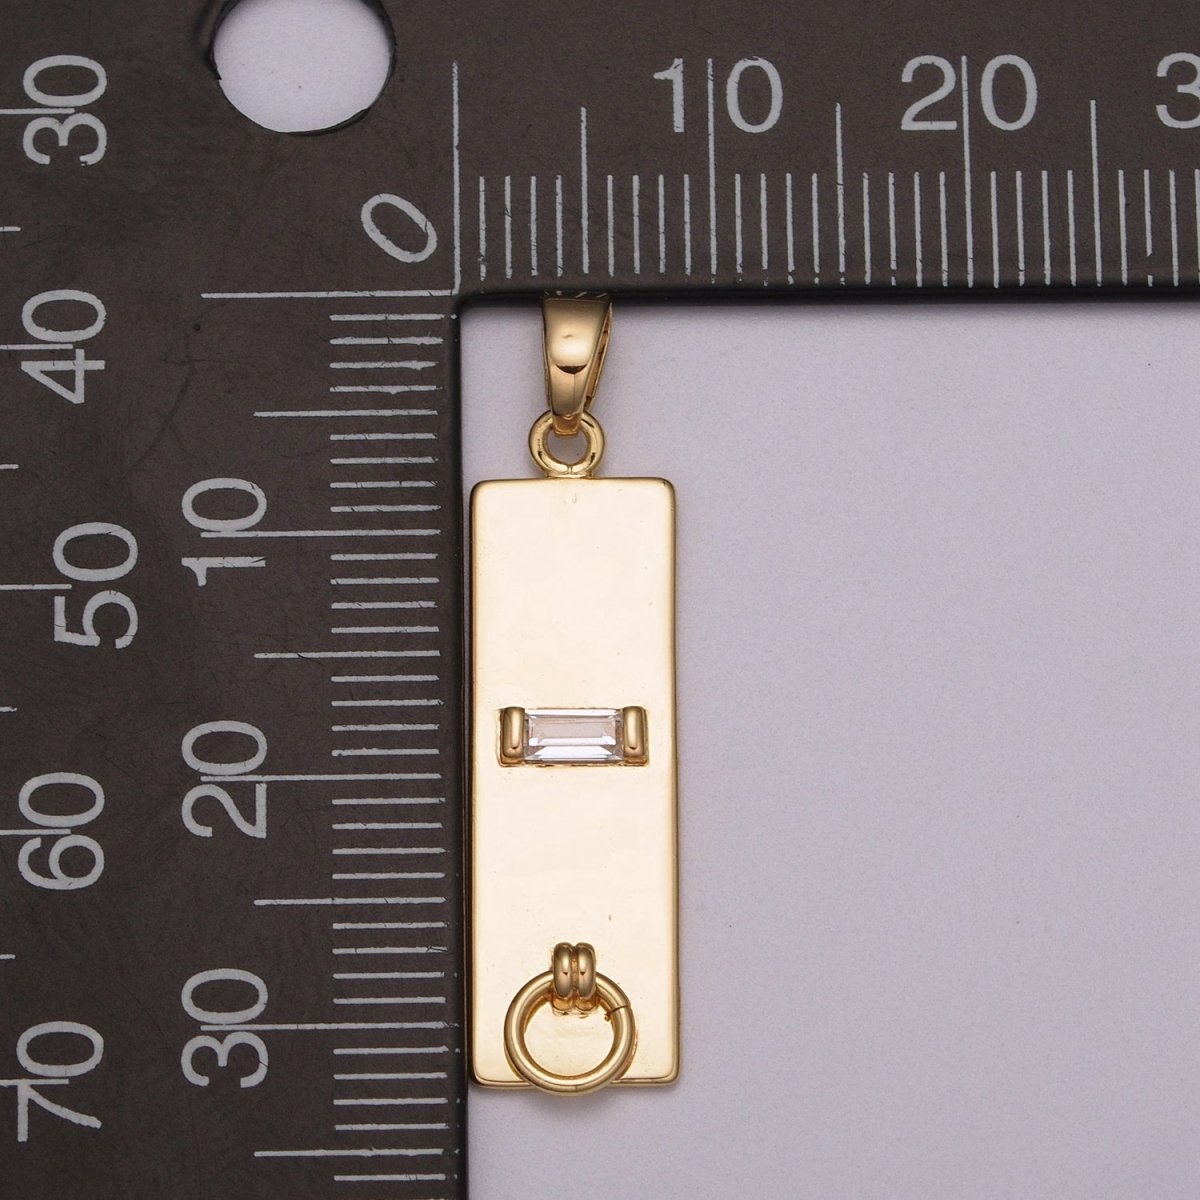 18k Gold Filled Long Rectangle Pendant Minimalist Geometry Jewelry Supply Component N-1408 - DLUXCA